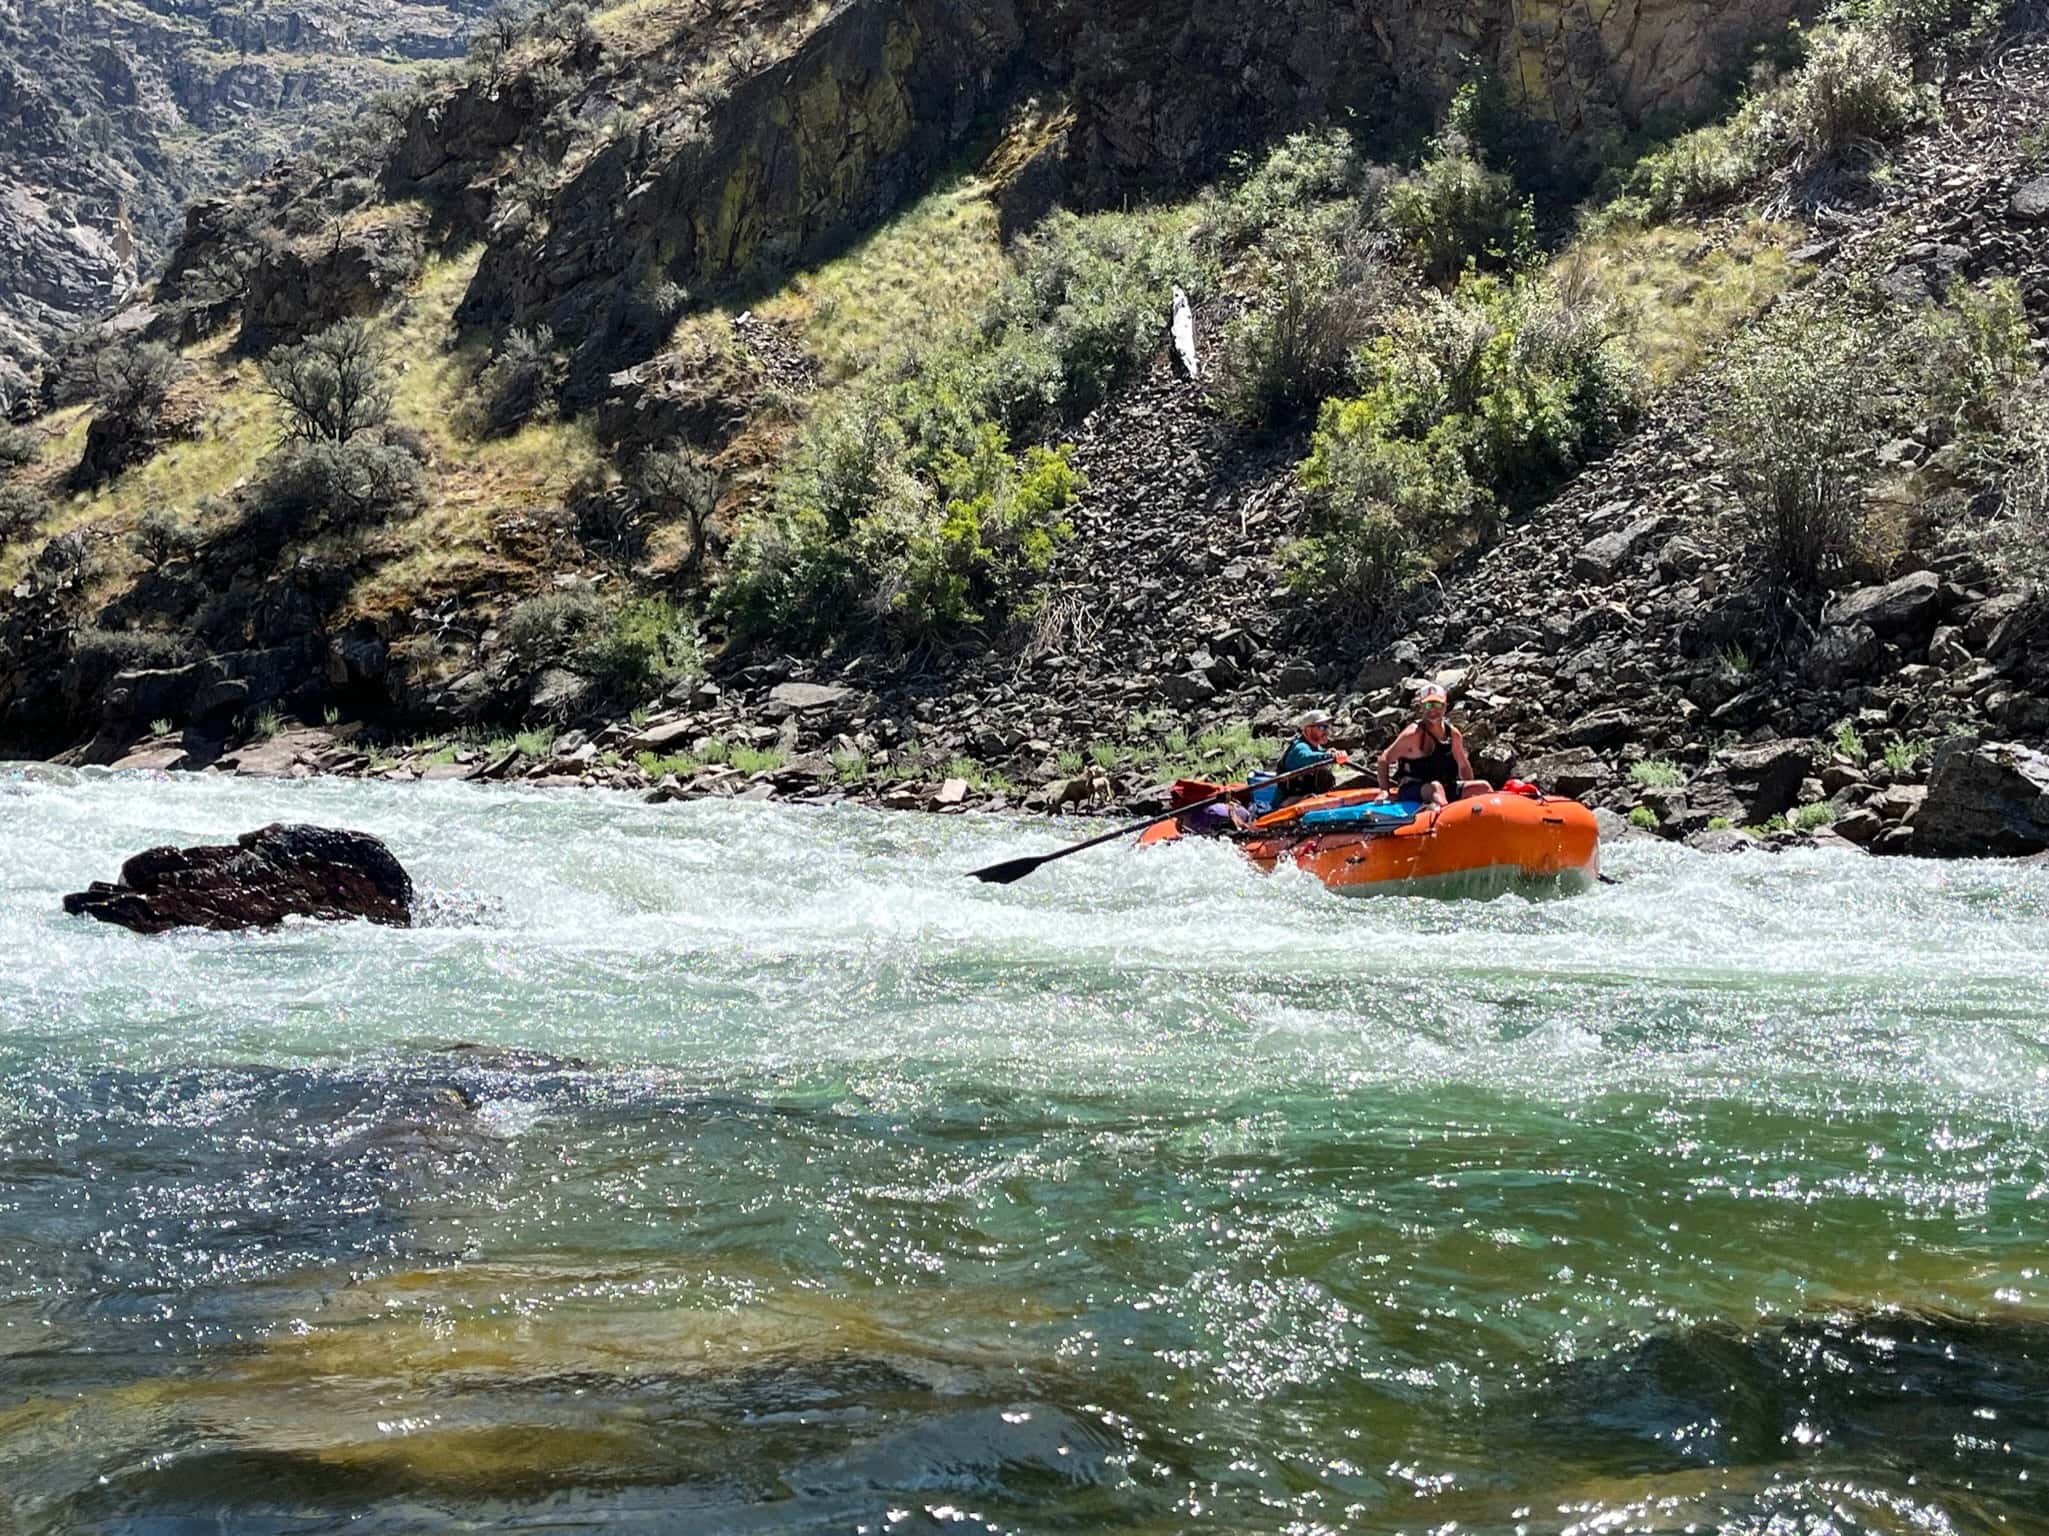 Navigating the rapids of the Salmon River